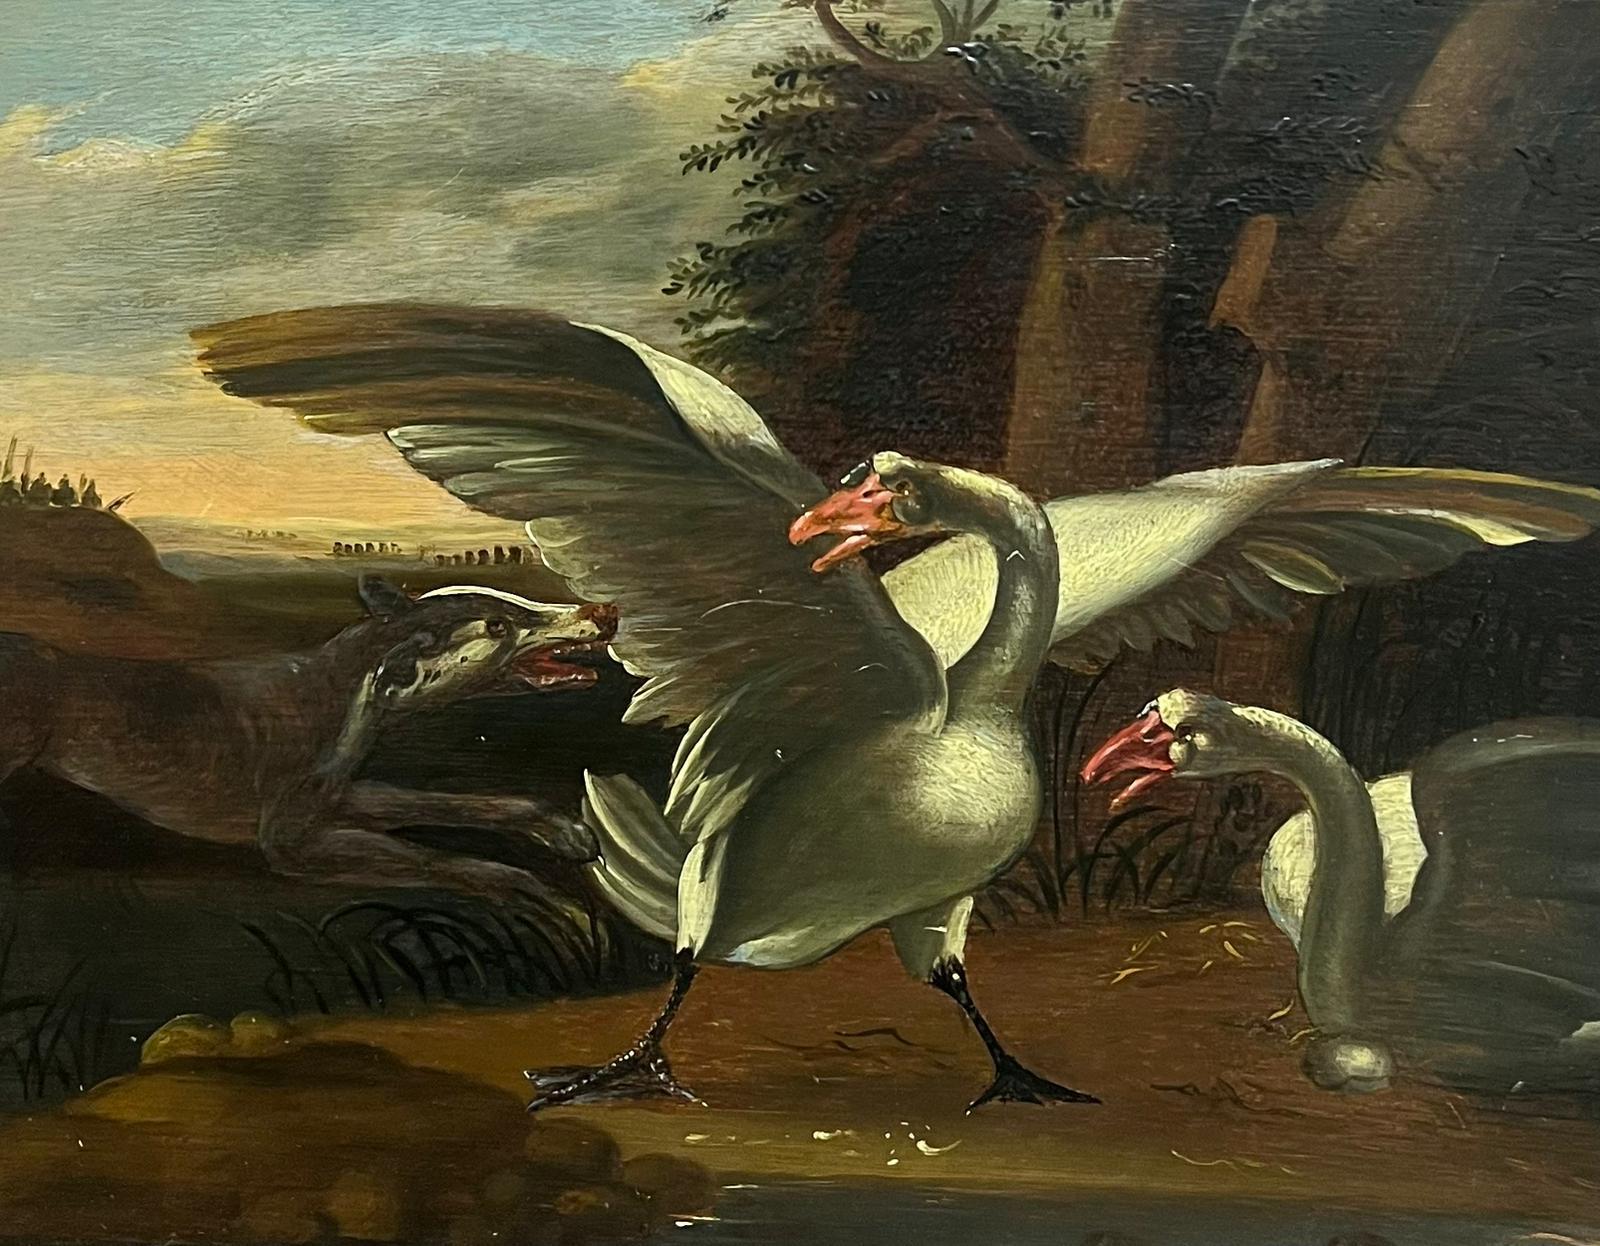 Swans Startled by Dog
Flemish Old Master, 18th century
oil on bevelled wood panel, framed
framed: 14.5 x 17 inches
panel: 10 x 13 inches
provenance: private collection, UK
condition: very good and sound condition, frame is more modern and has some